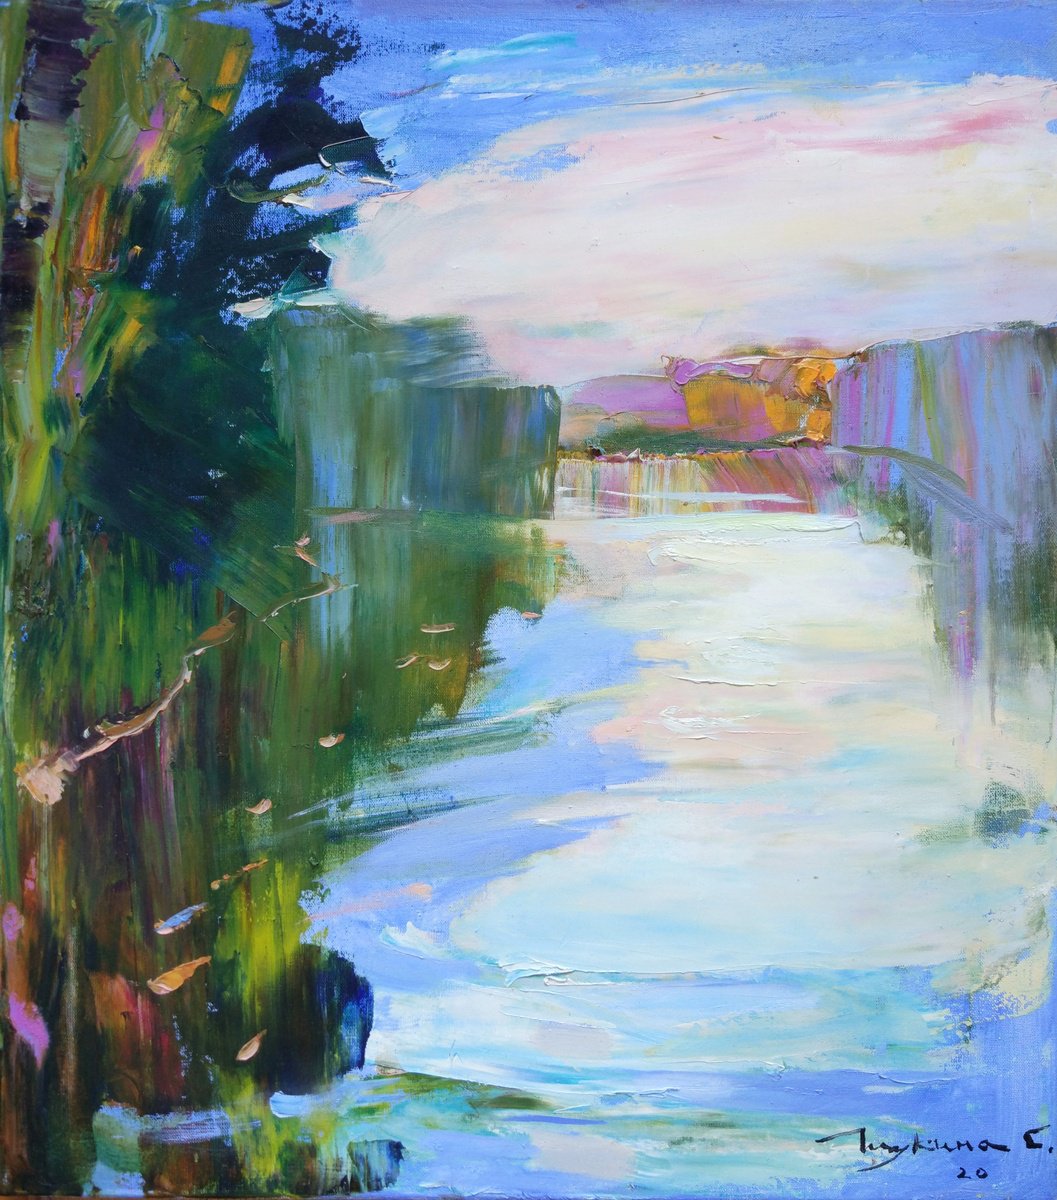 By the lake. Reflection of the sky in the water . Original oil painting by Helen Shukina